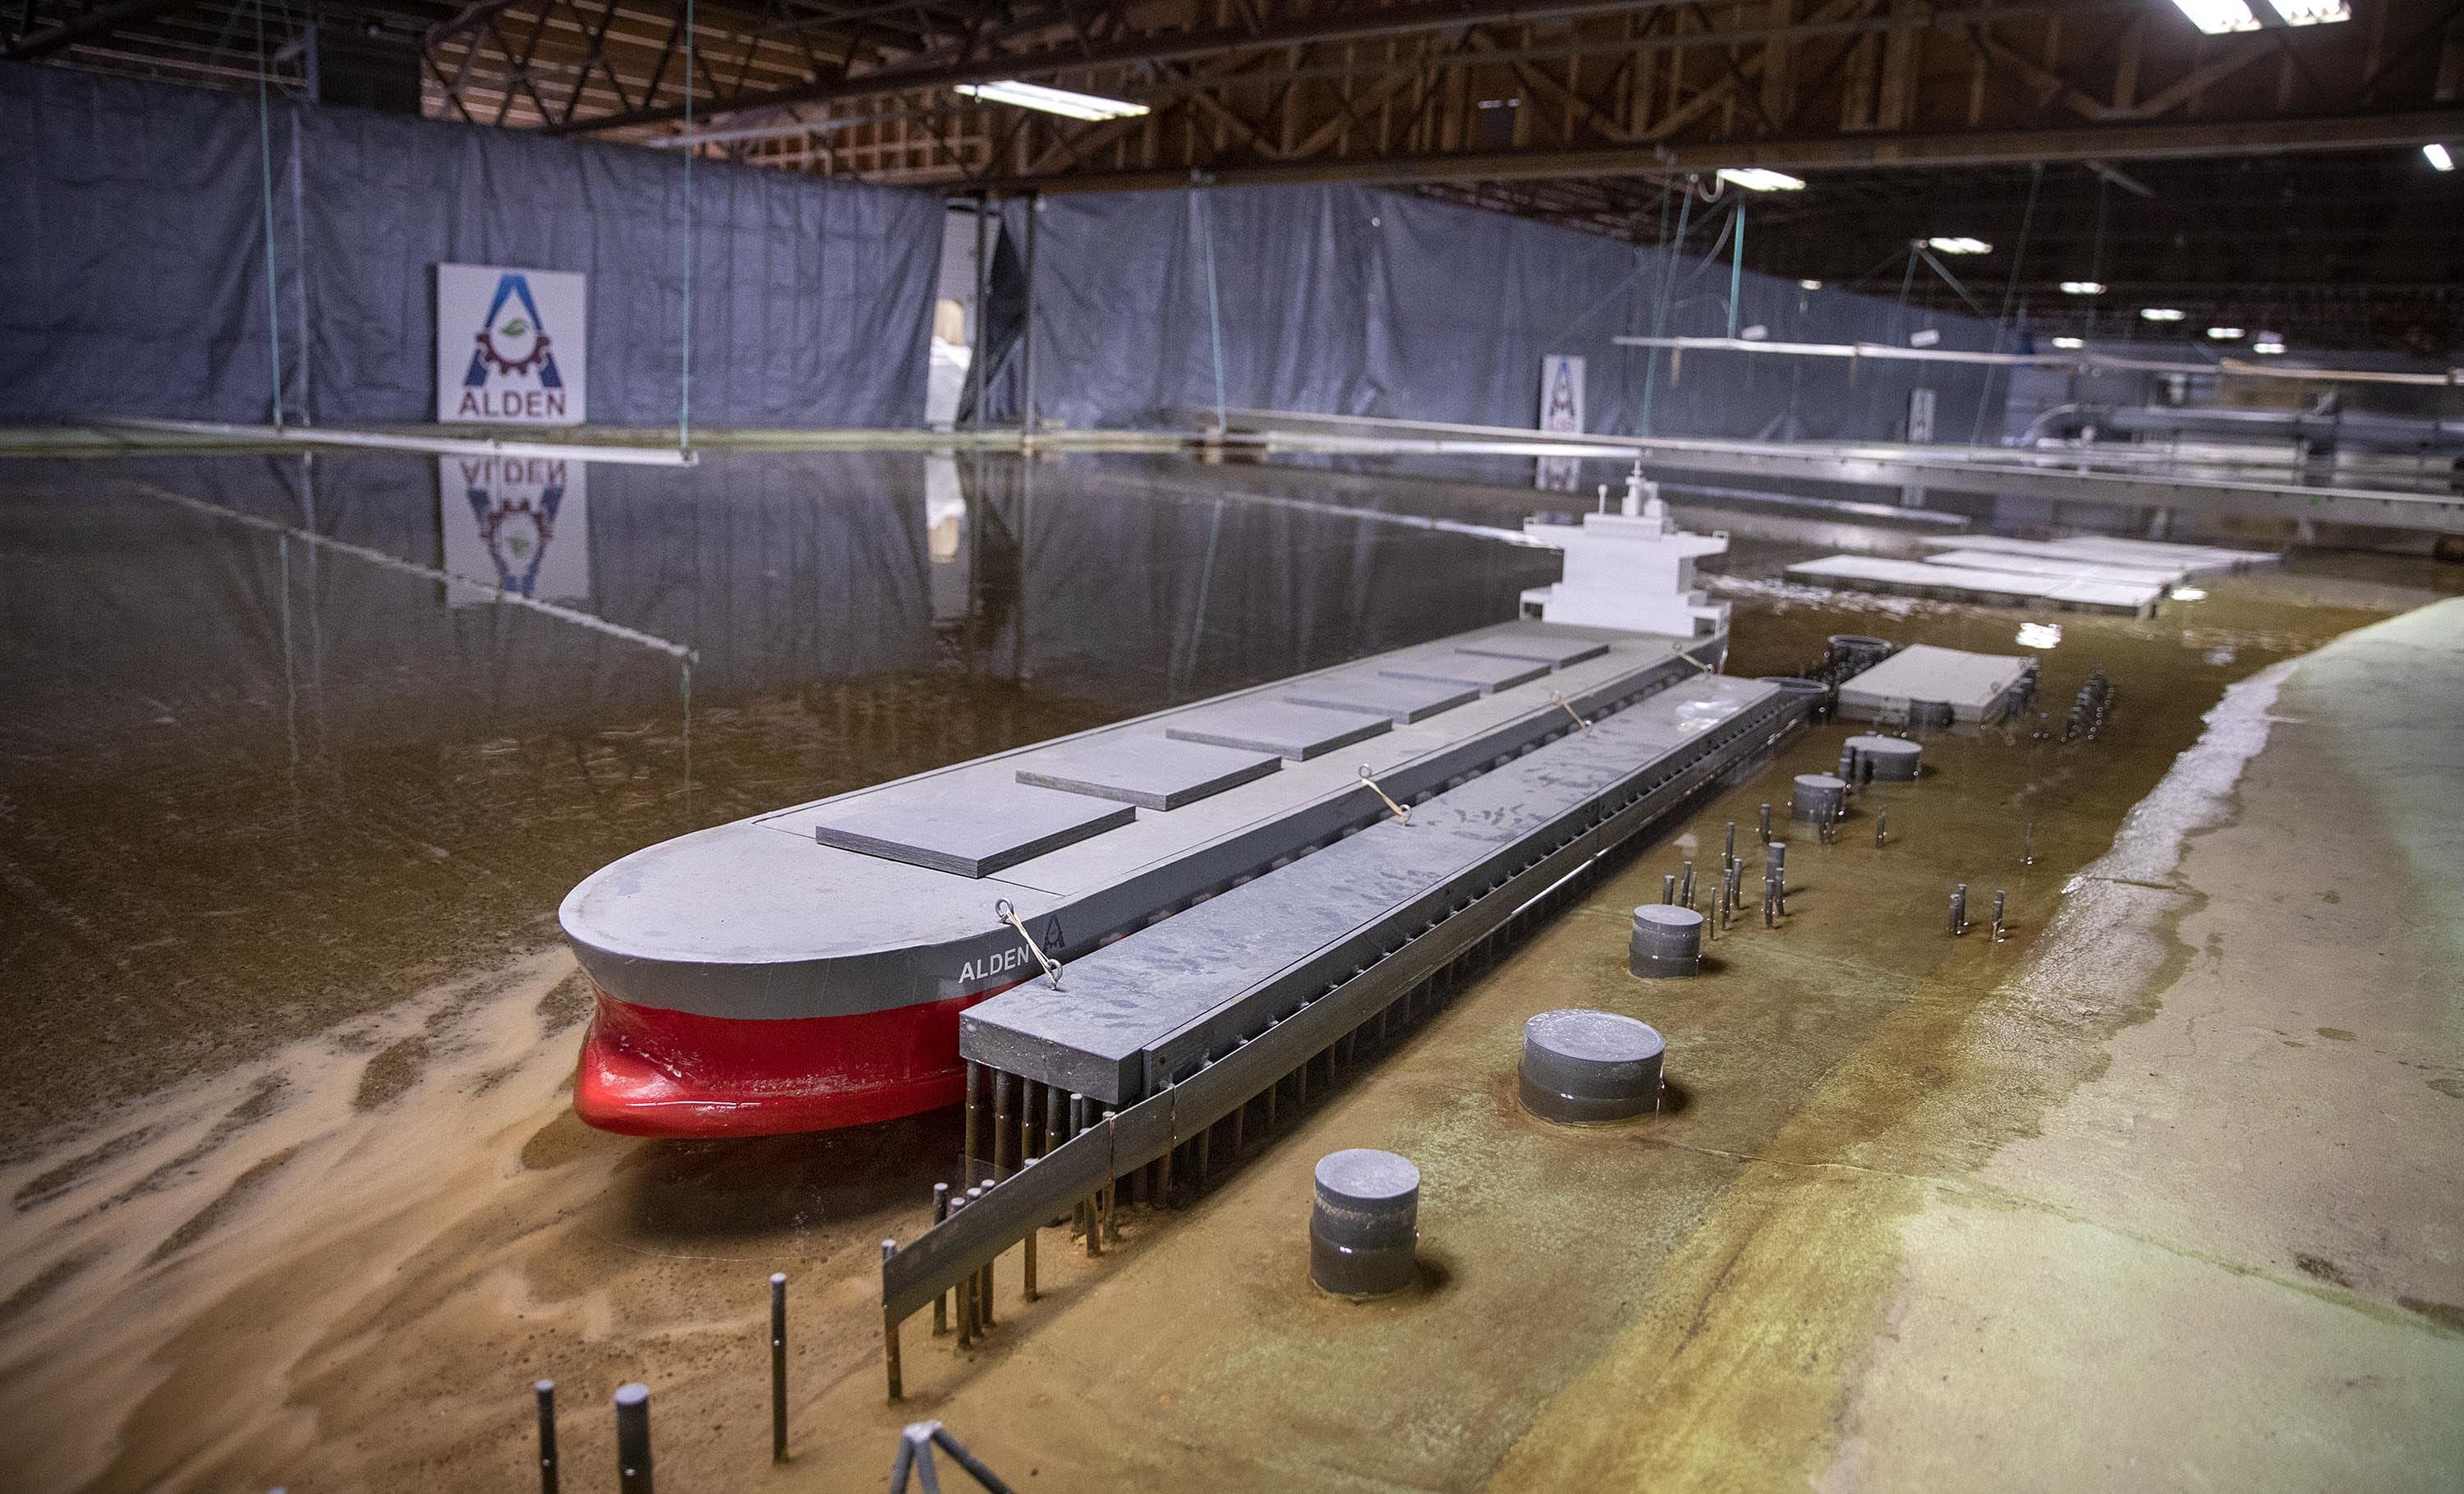 A cargo vessel lies docked on the banks of Alden's 1:65 scale model of a section of the Mississippi River. (Robin Lubbock/WBUR)